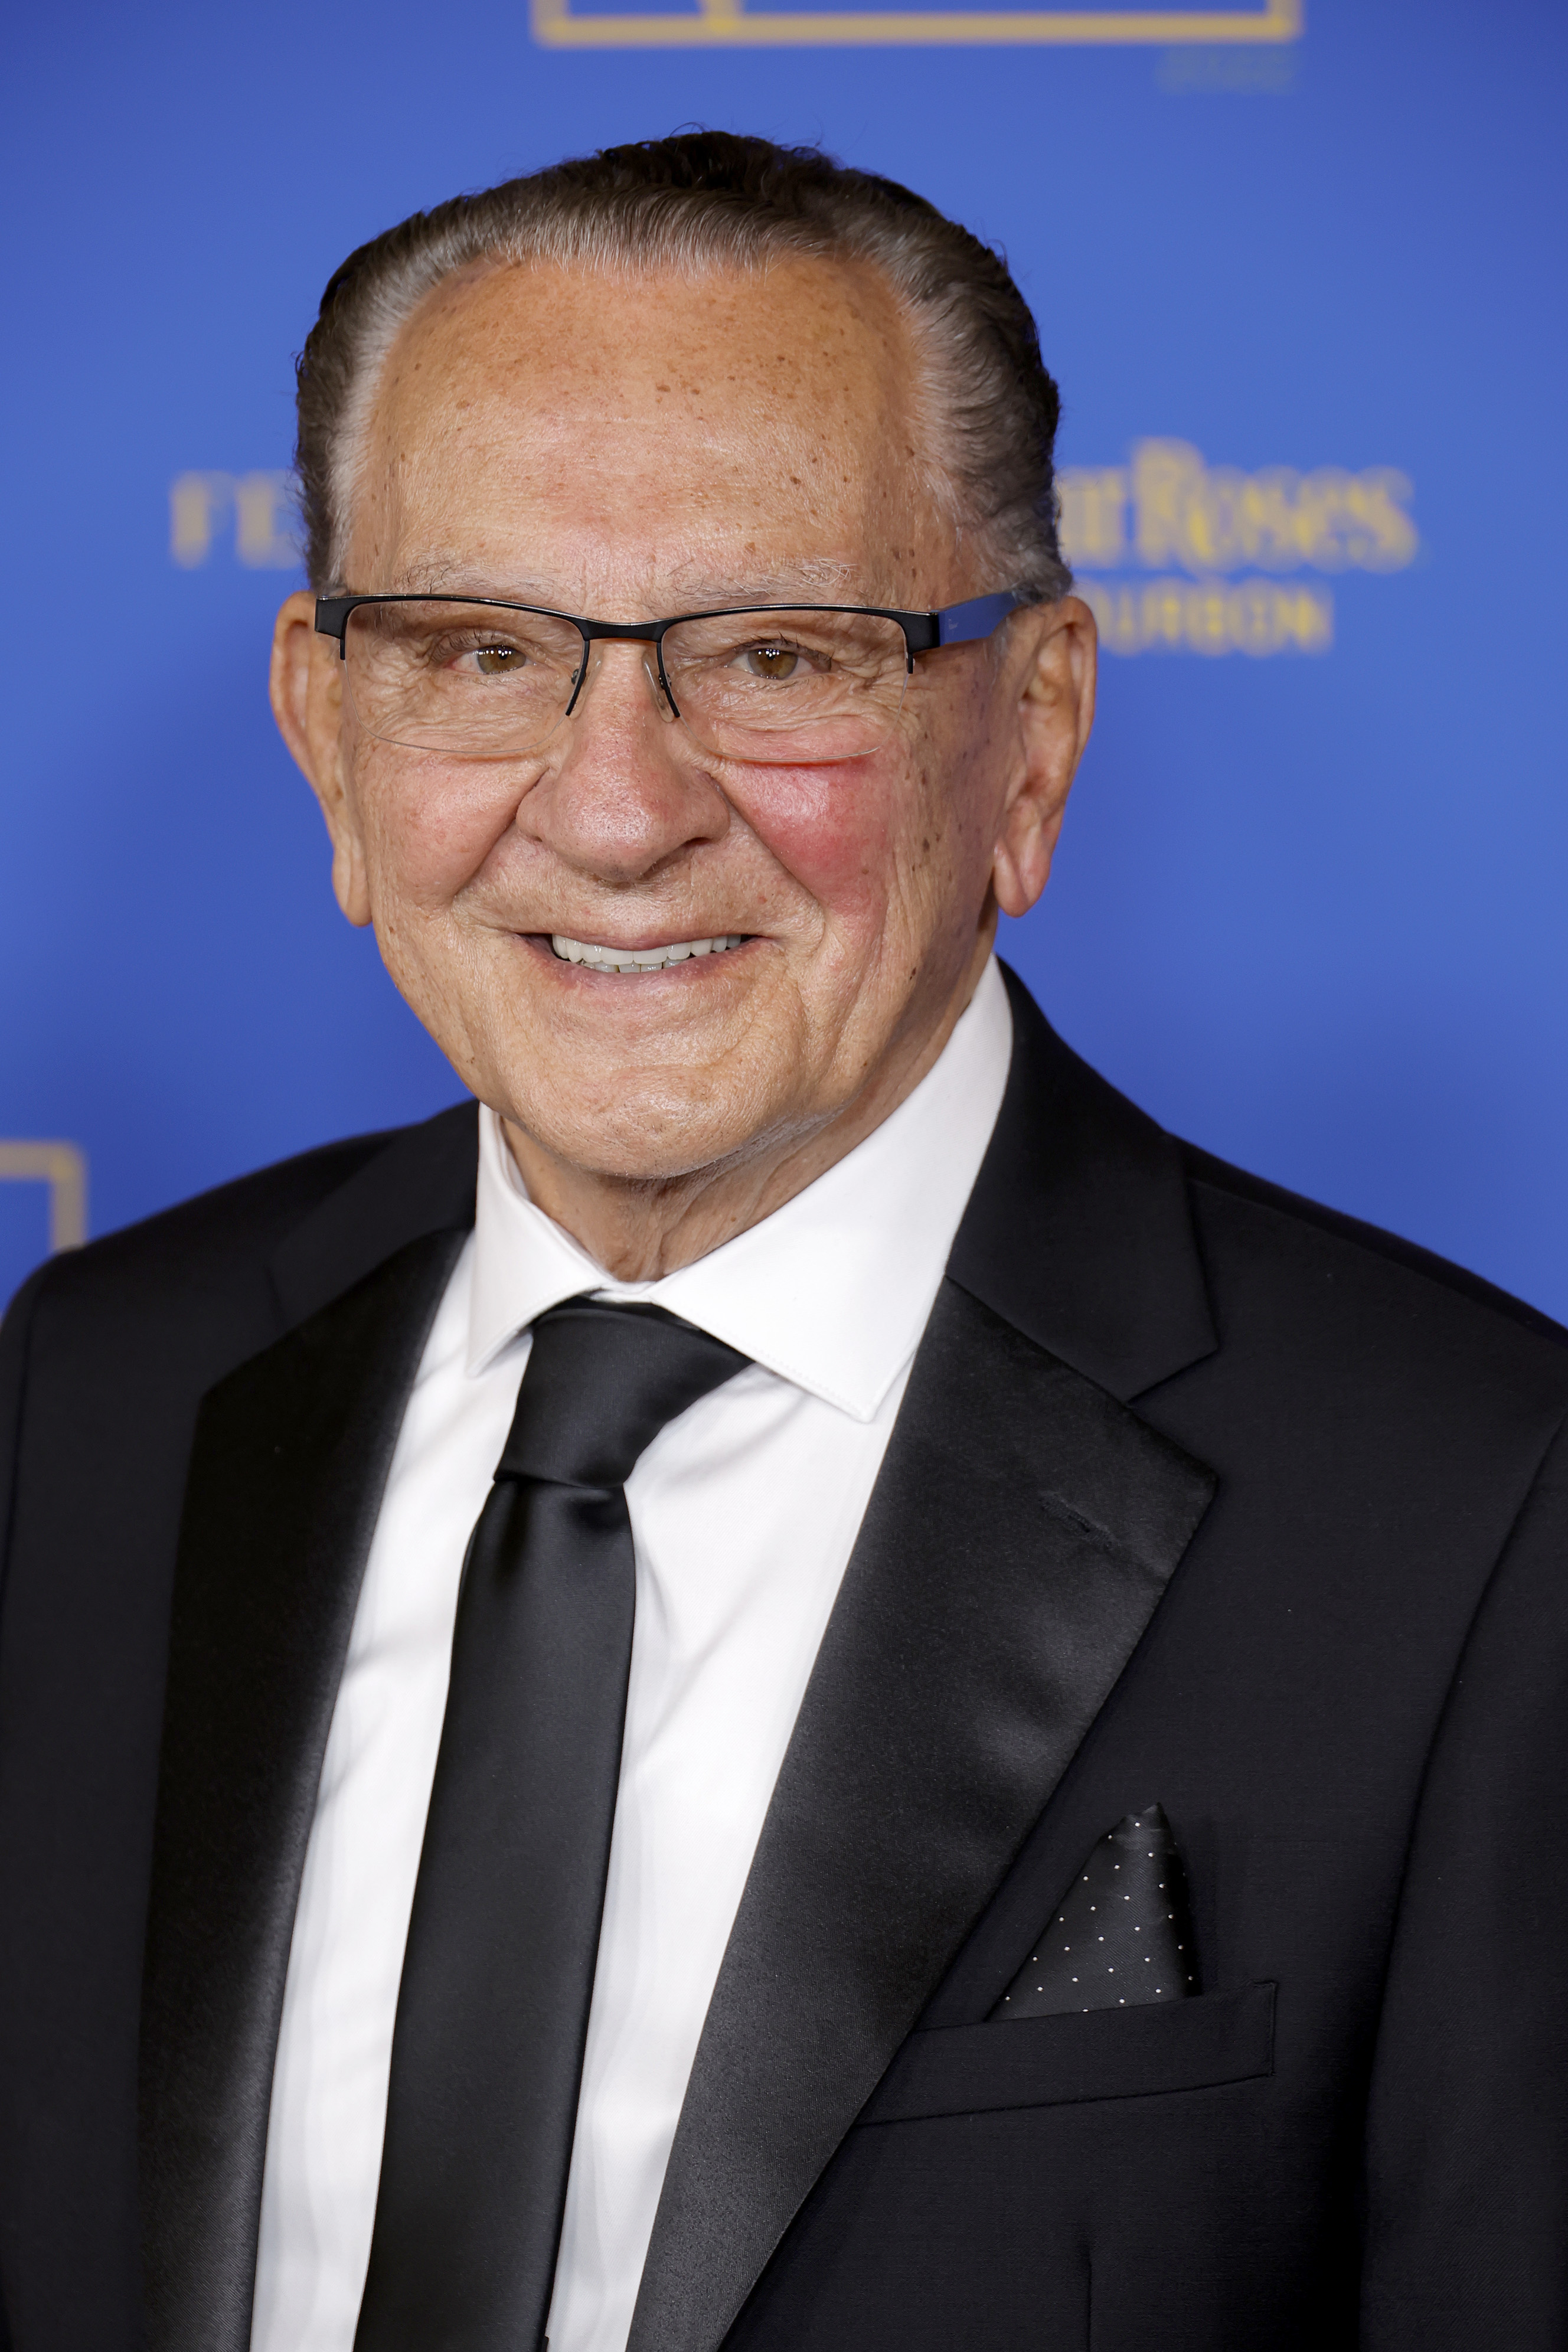 Frank Caprio at the Creative Arts & Lifestyle Emmys in Pasadena, California on June 18, 2022 | Source: Getty Images